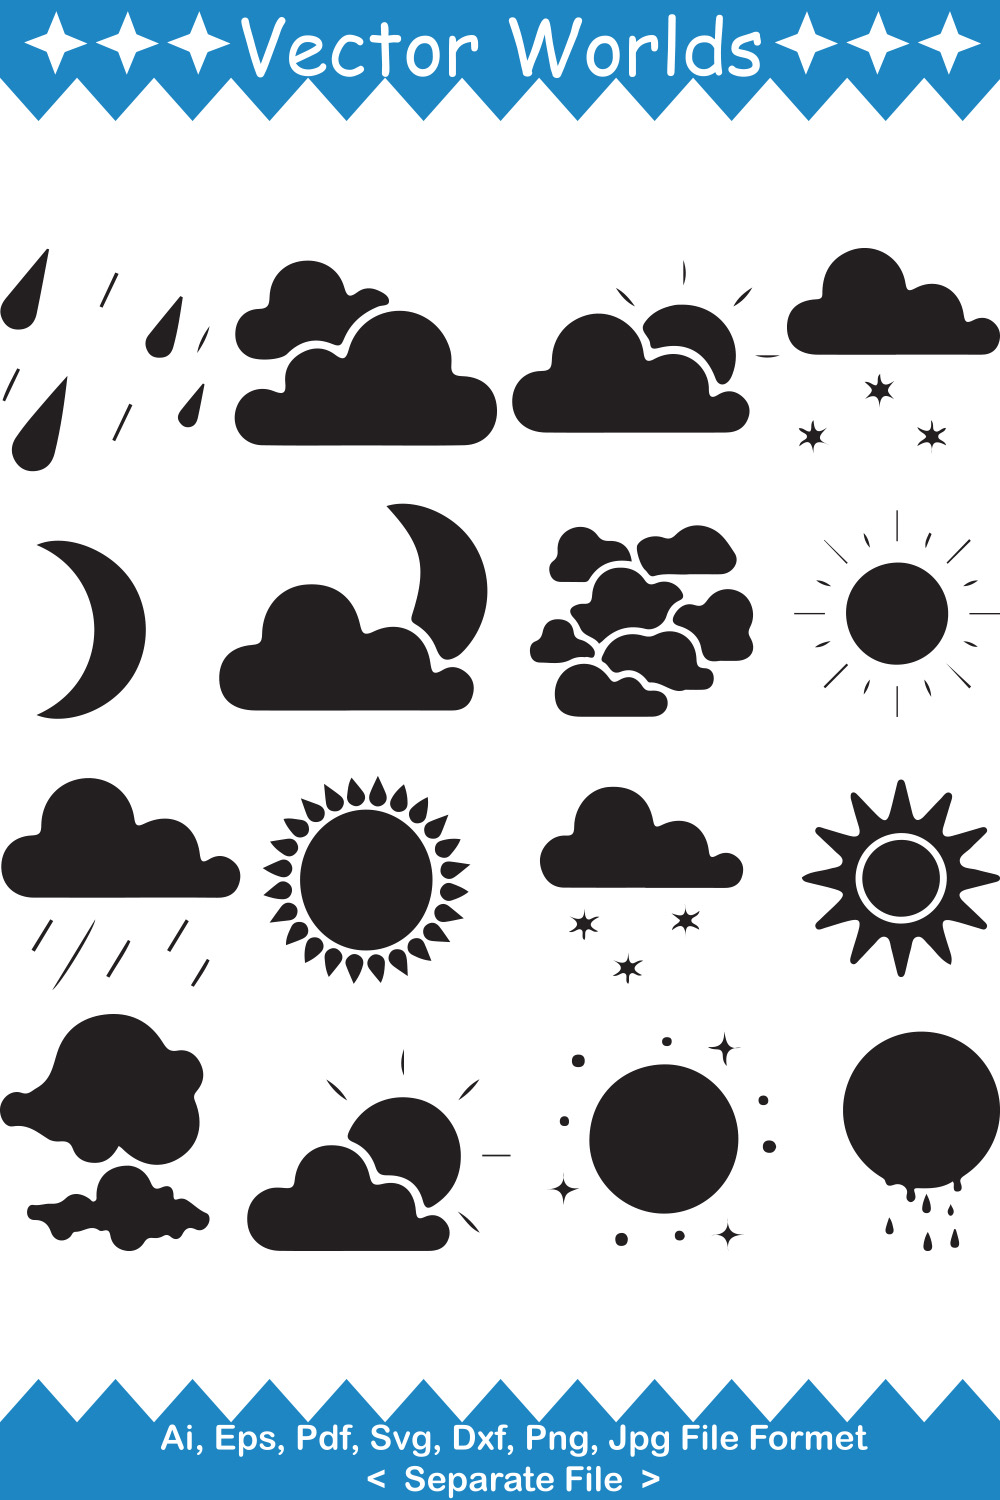 Collection of vector irresistible weather silhouettes images.